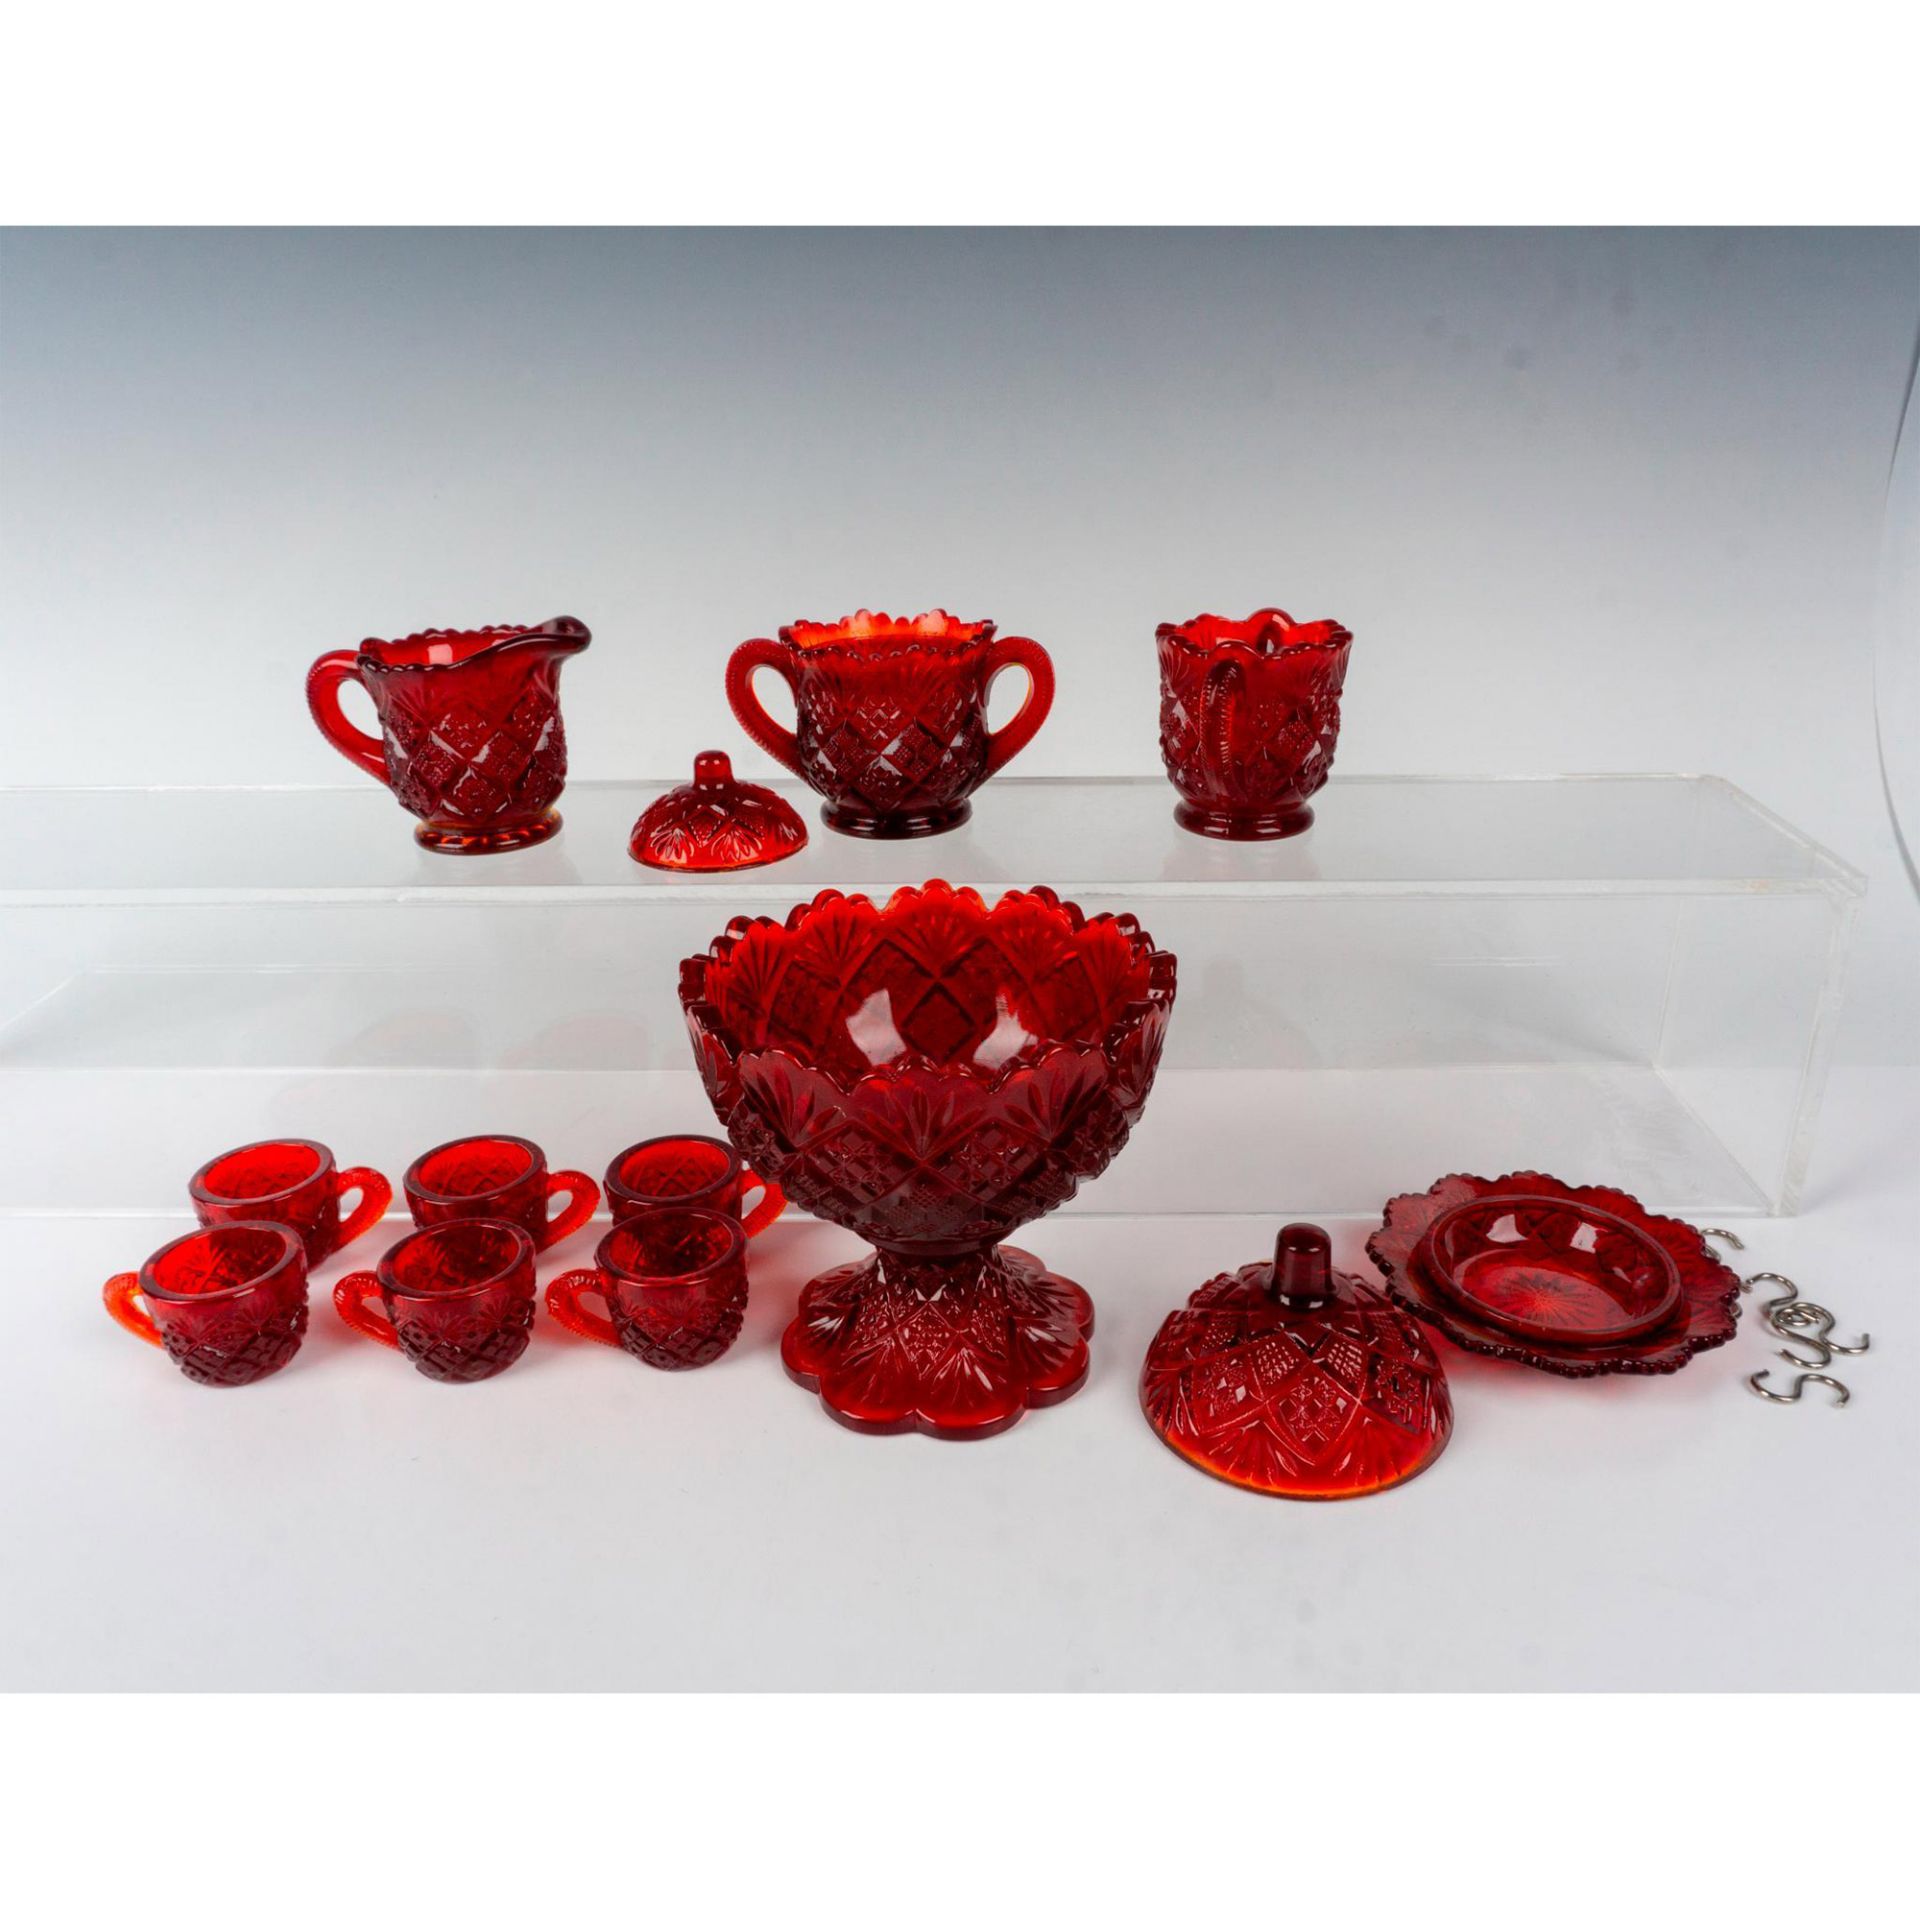 11pc Westmoreland Ruby Red Child's Dish Grouping - Image 2 of 3